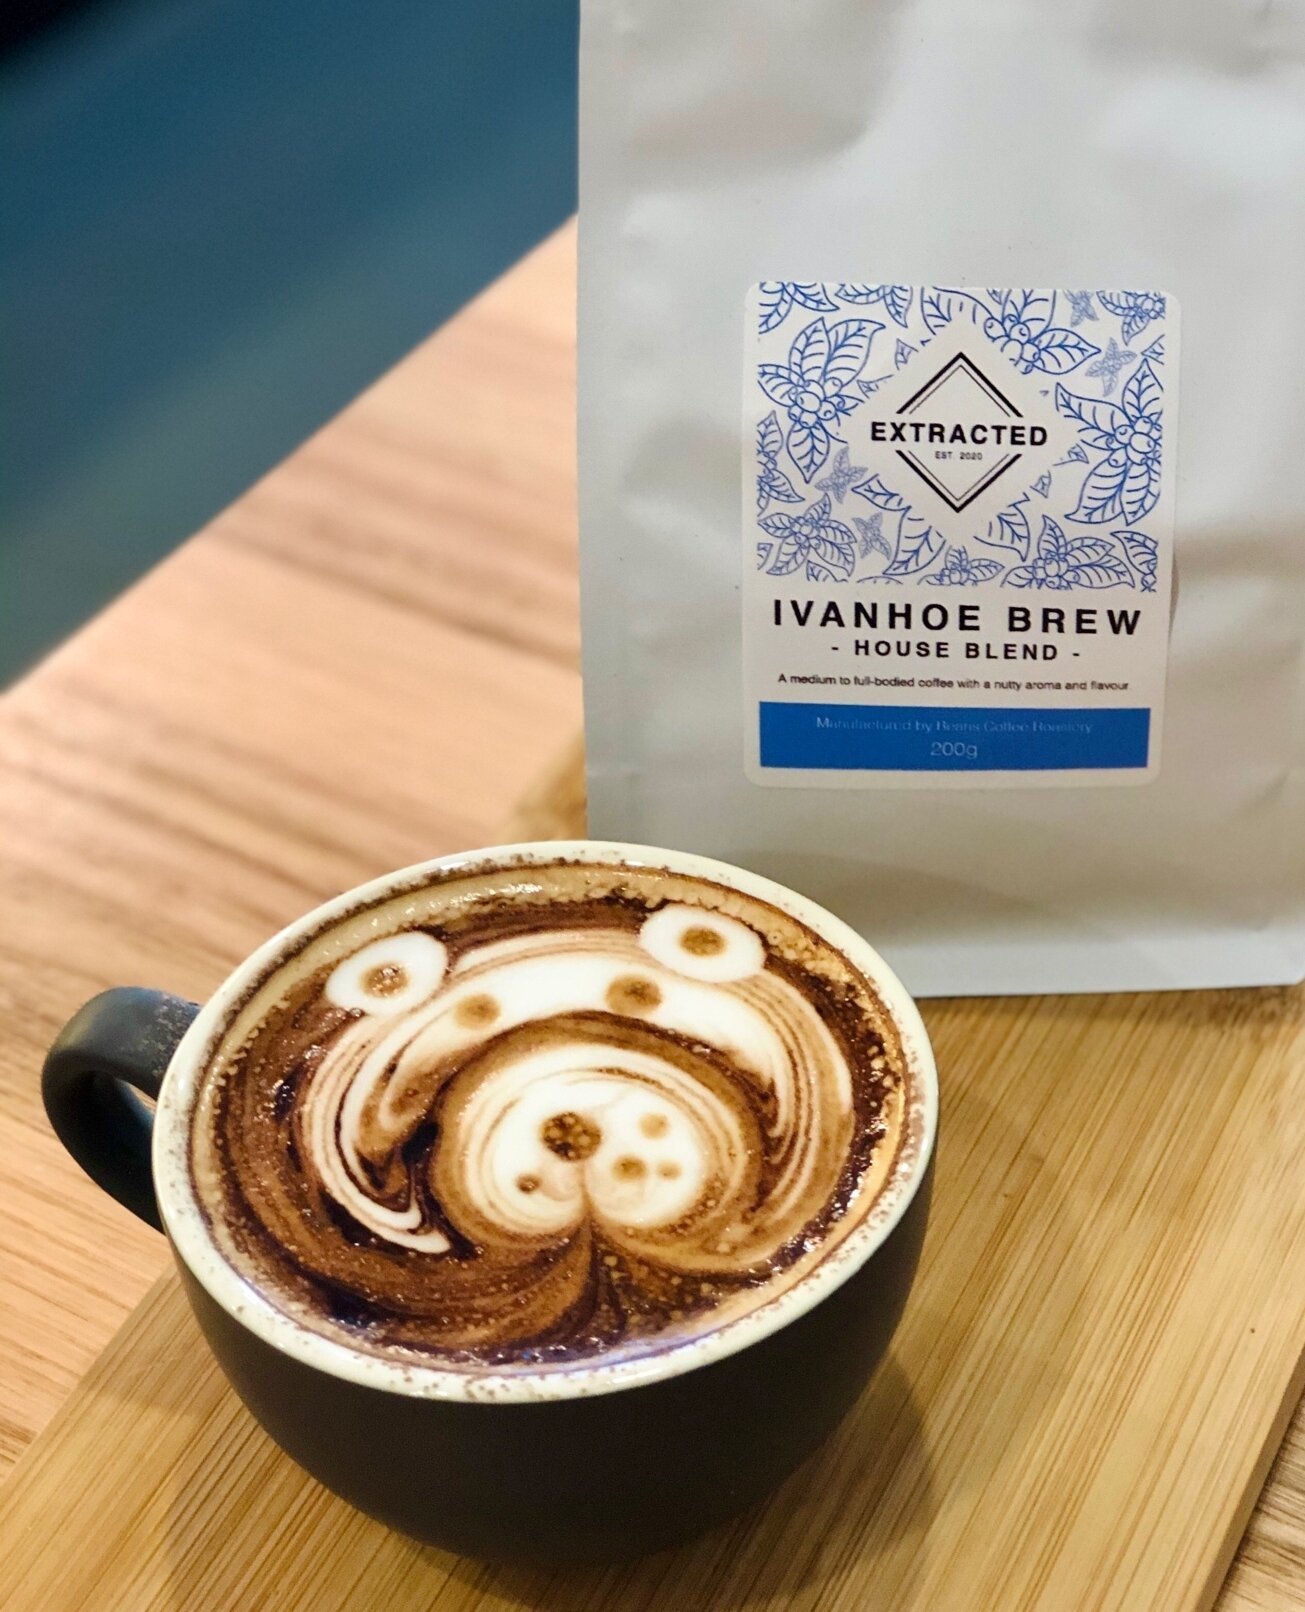 We hope you have a beary good day! ☀️⁠
⁠
⁠
⁠
#extractedivanhoe #coffee #ivanhoecafe #dineinivanhoe #melbournecafe #hungry #delicious​#breakfast #healthylifestyle #supportlocal #brunchinmelbourne #foodiegram #coffeeshop #melbourne #foodie #lunch #food